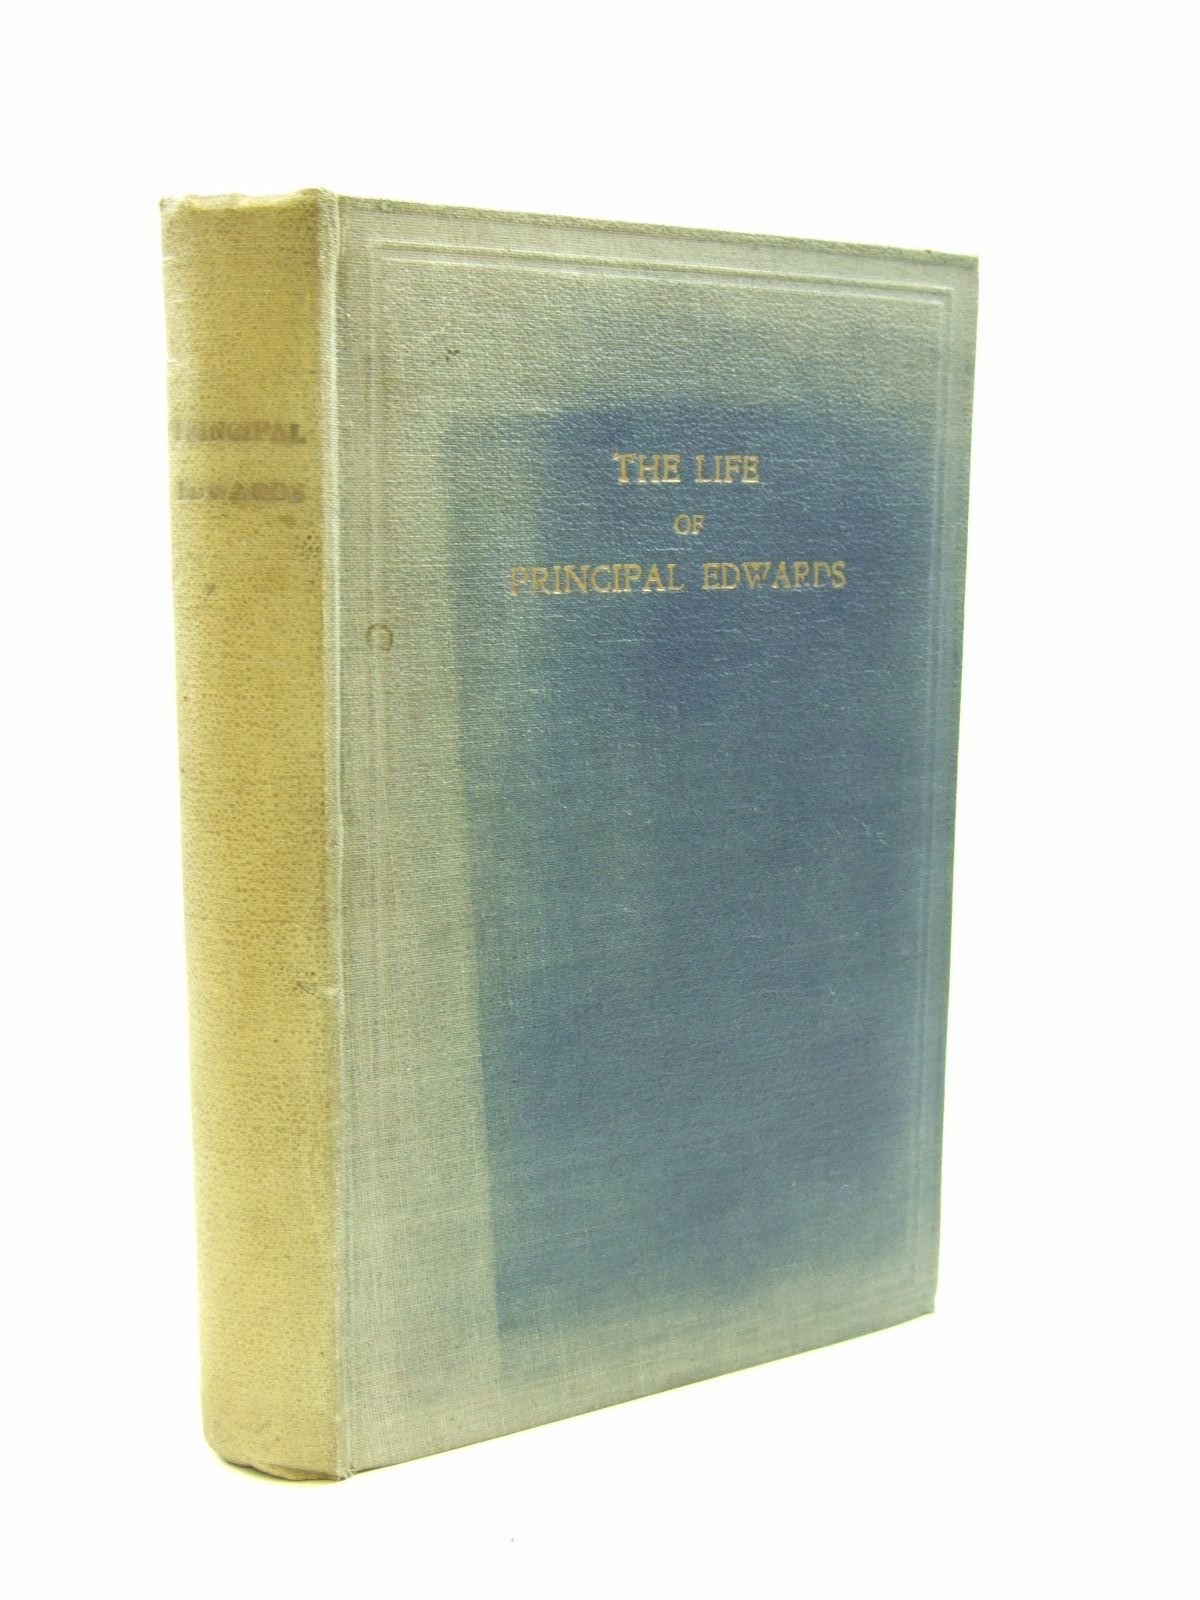 Photo of THE LIFE OF PRINCIPAL WILLIAM EDWARDS written by Chance, T.W. published by Priory Press Limited (STOCK CODE: 1207565)  for sale by Stella & Rose's Books